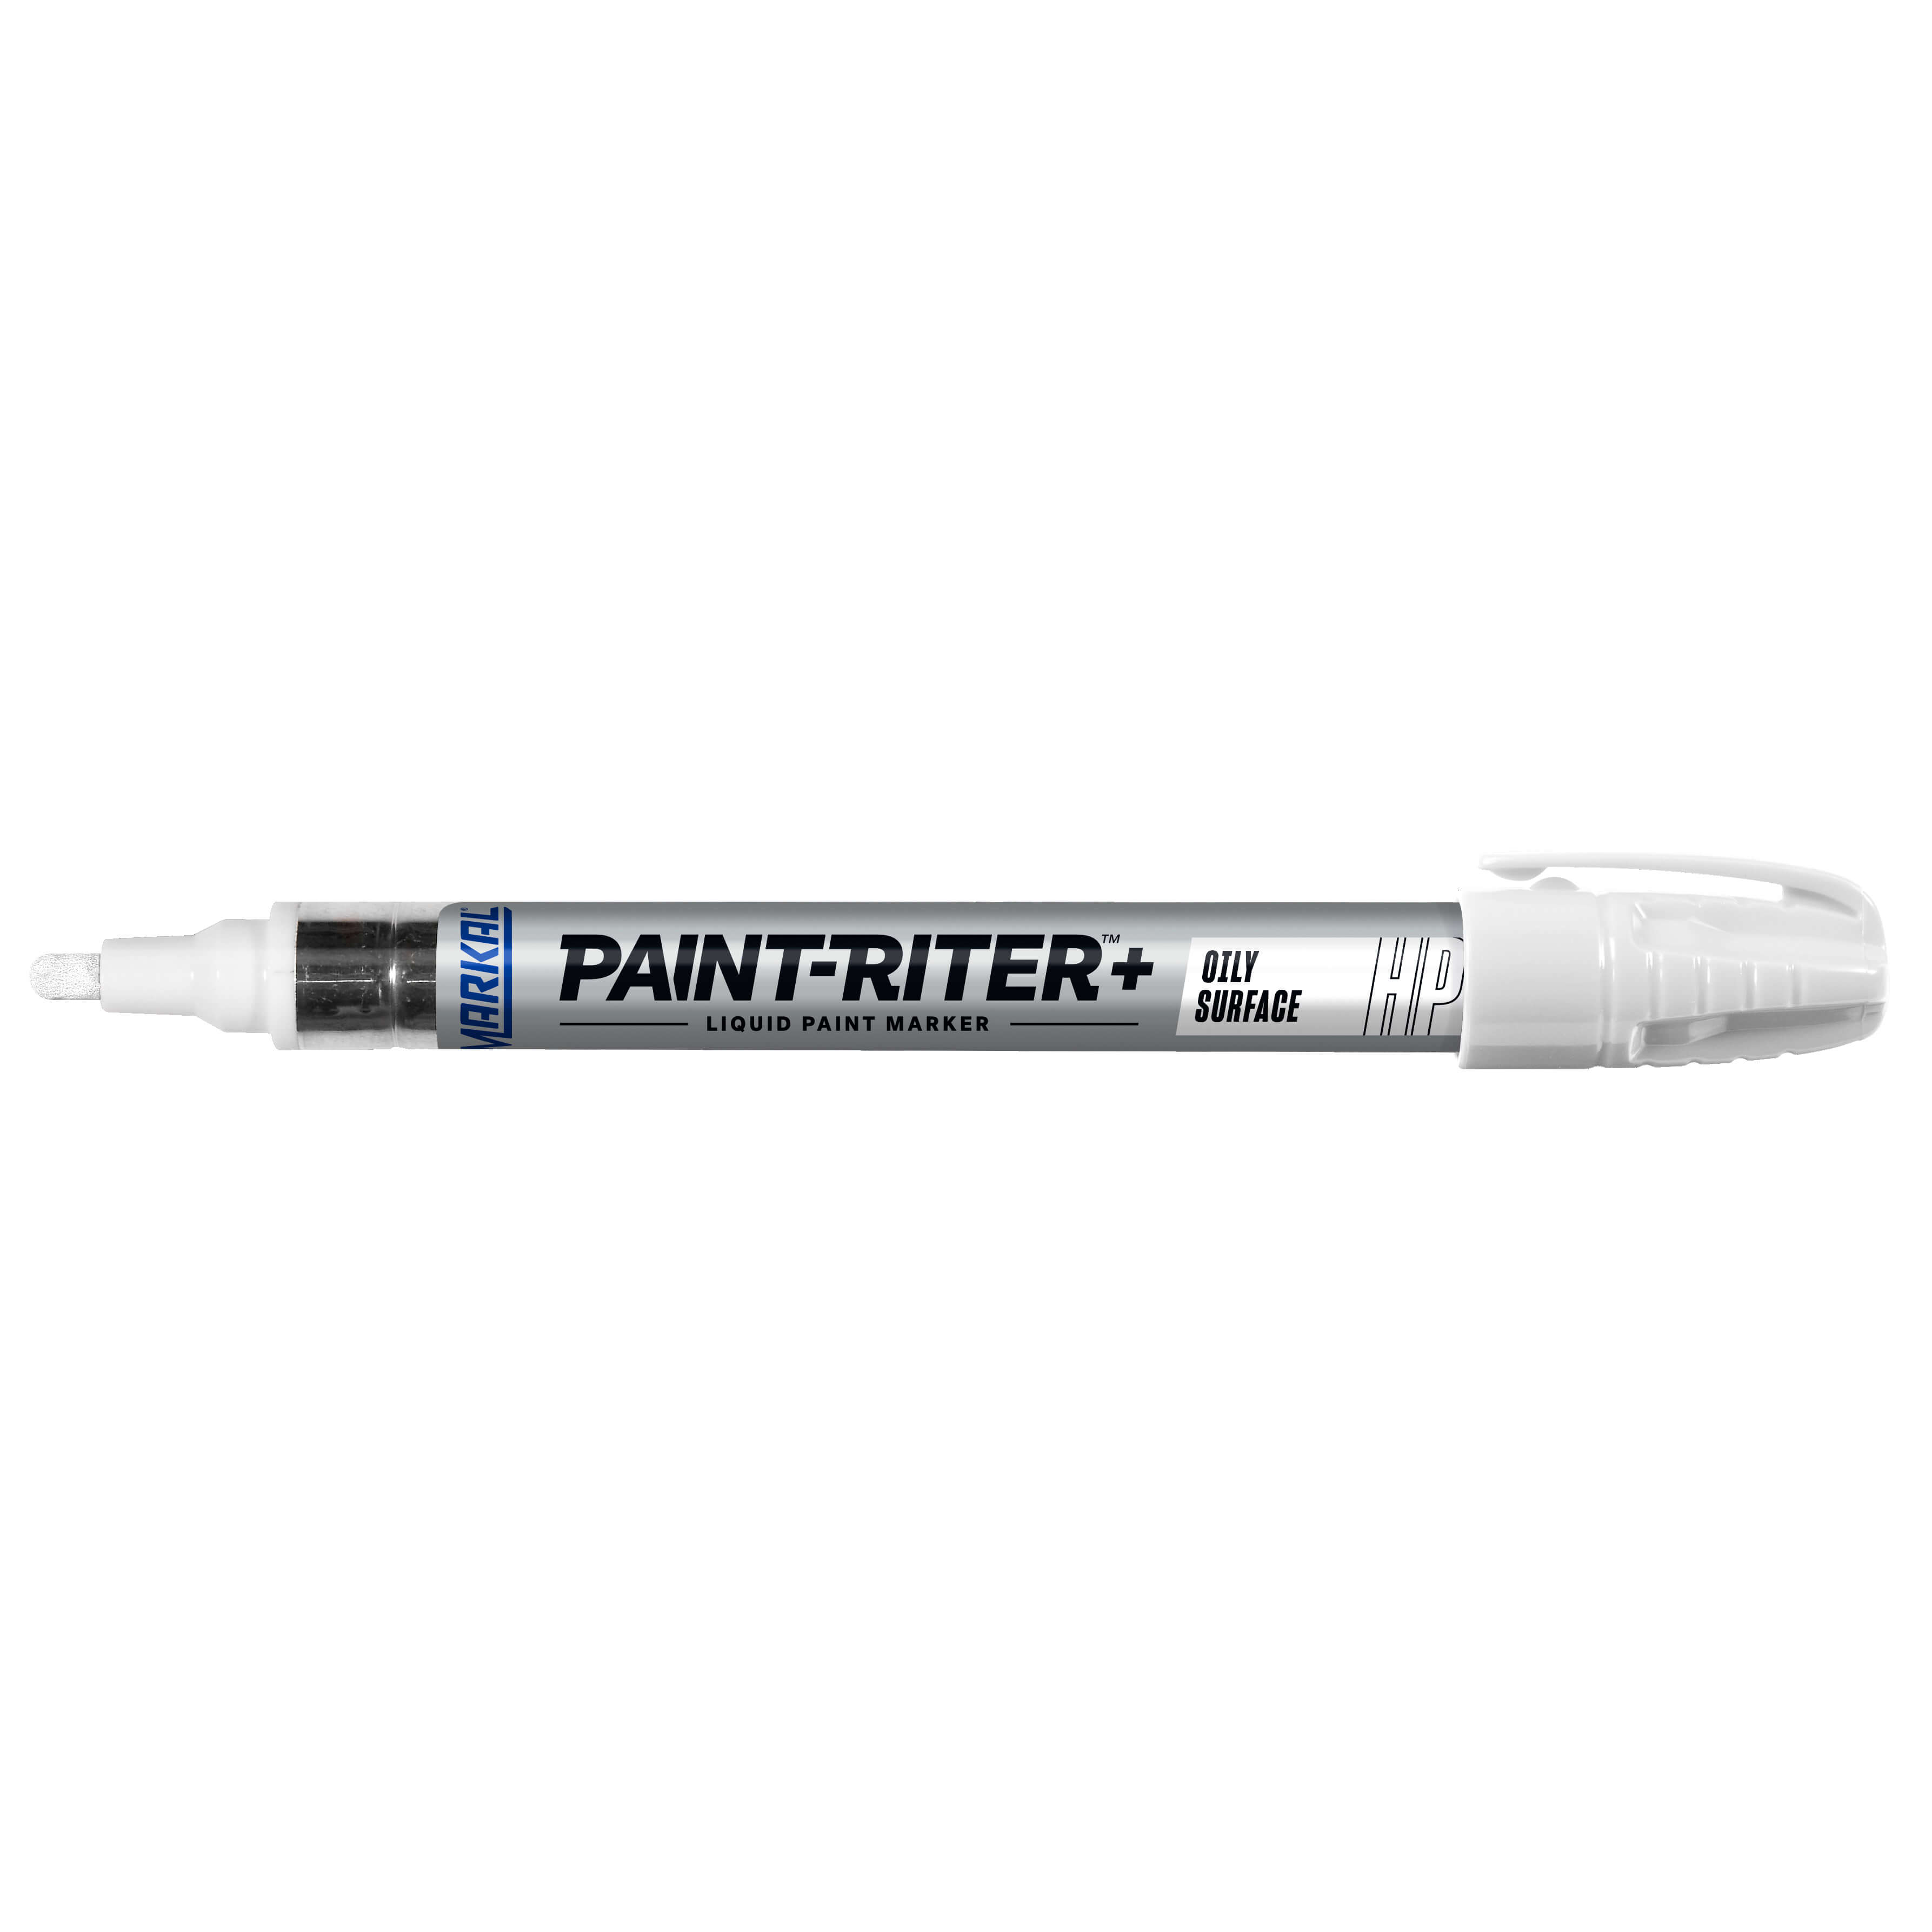 Paint-Riter + Oily Surface HP – paint marker for oily surfaces, white